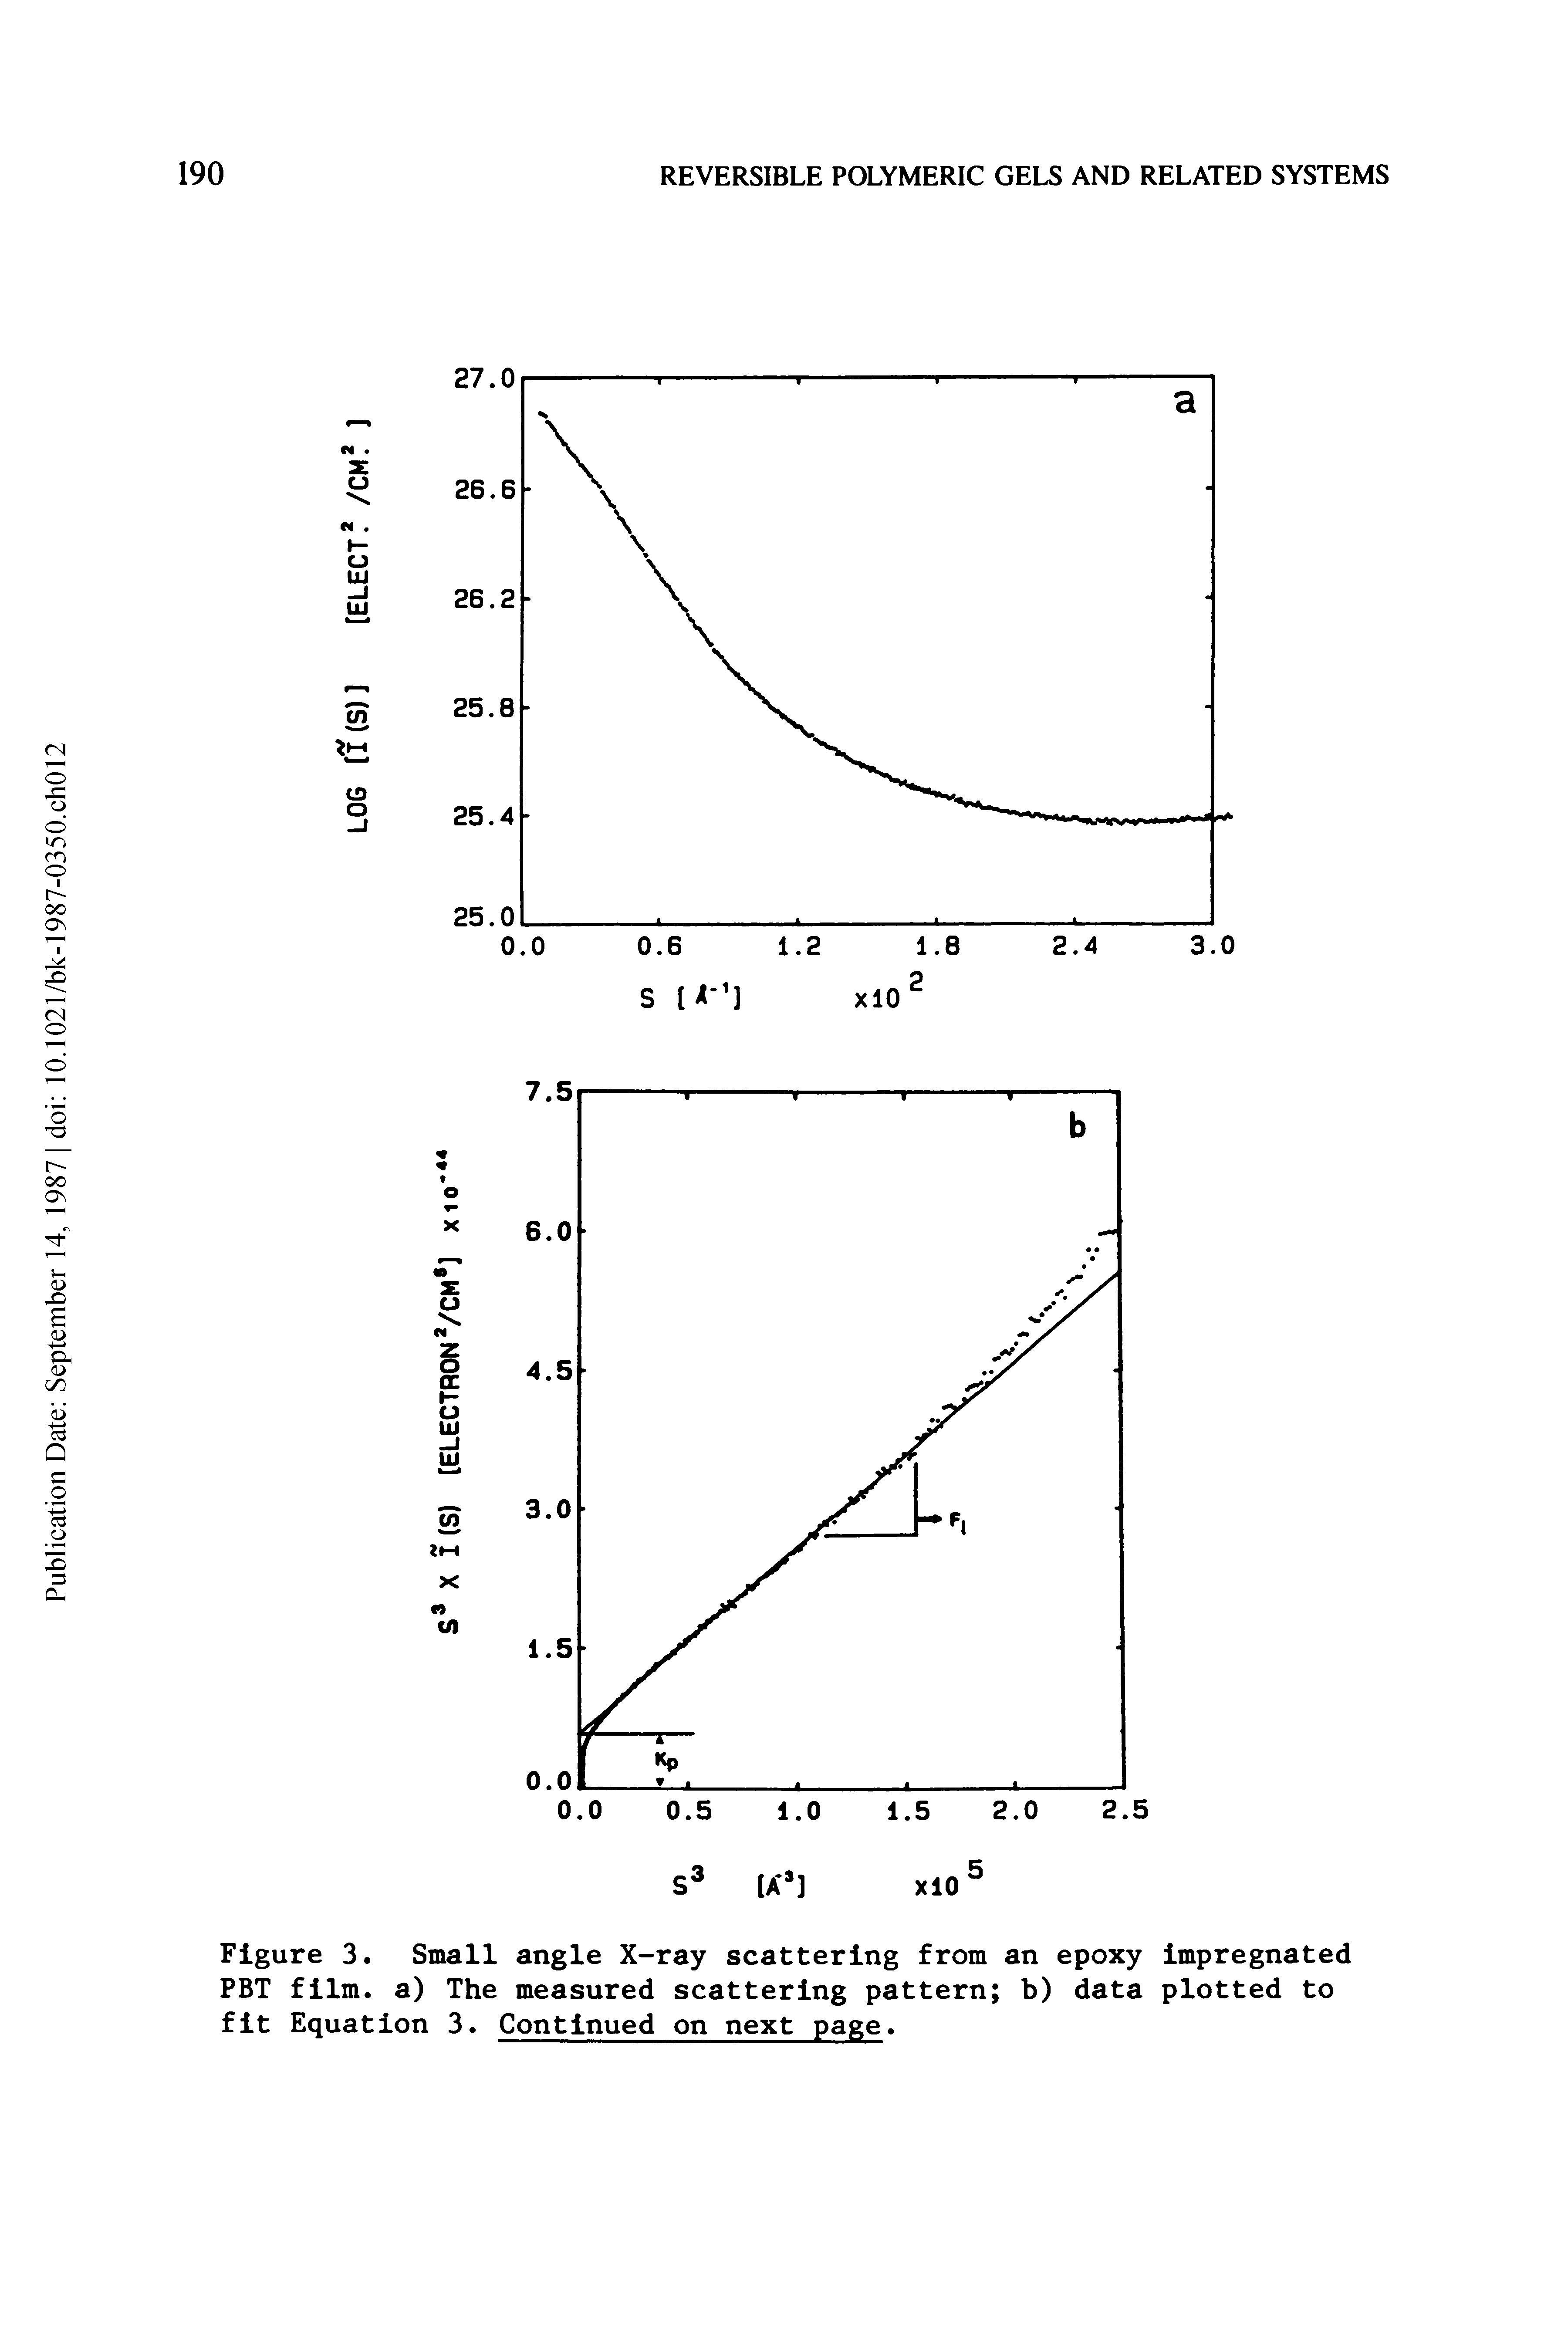 Figure 3. Small angle X-ray scattering from an epoxy impregnated PBT film, a) The measured scattering pattern b) data plotted to fit Equation 3. Continued on next page.